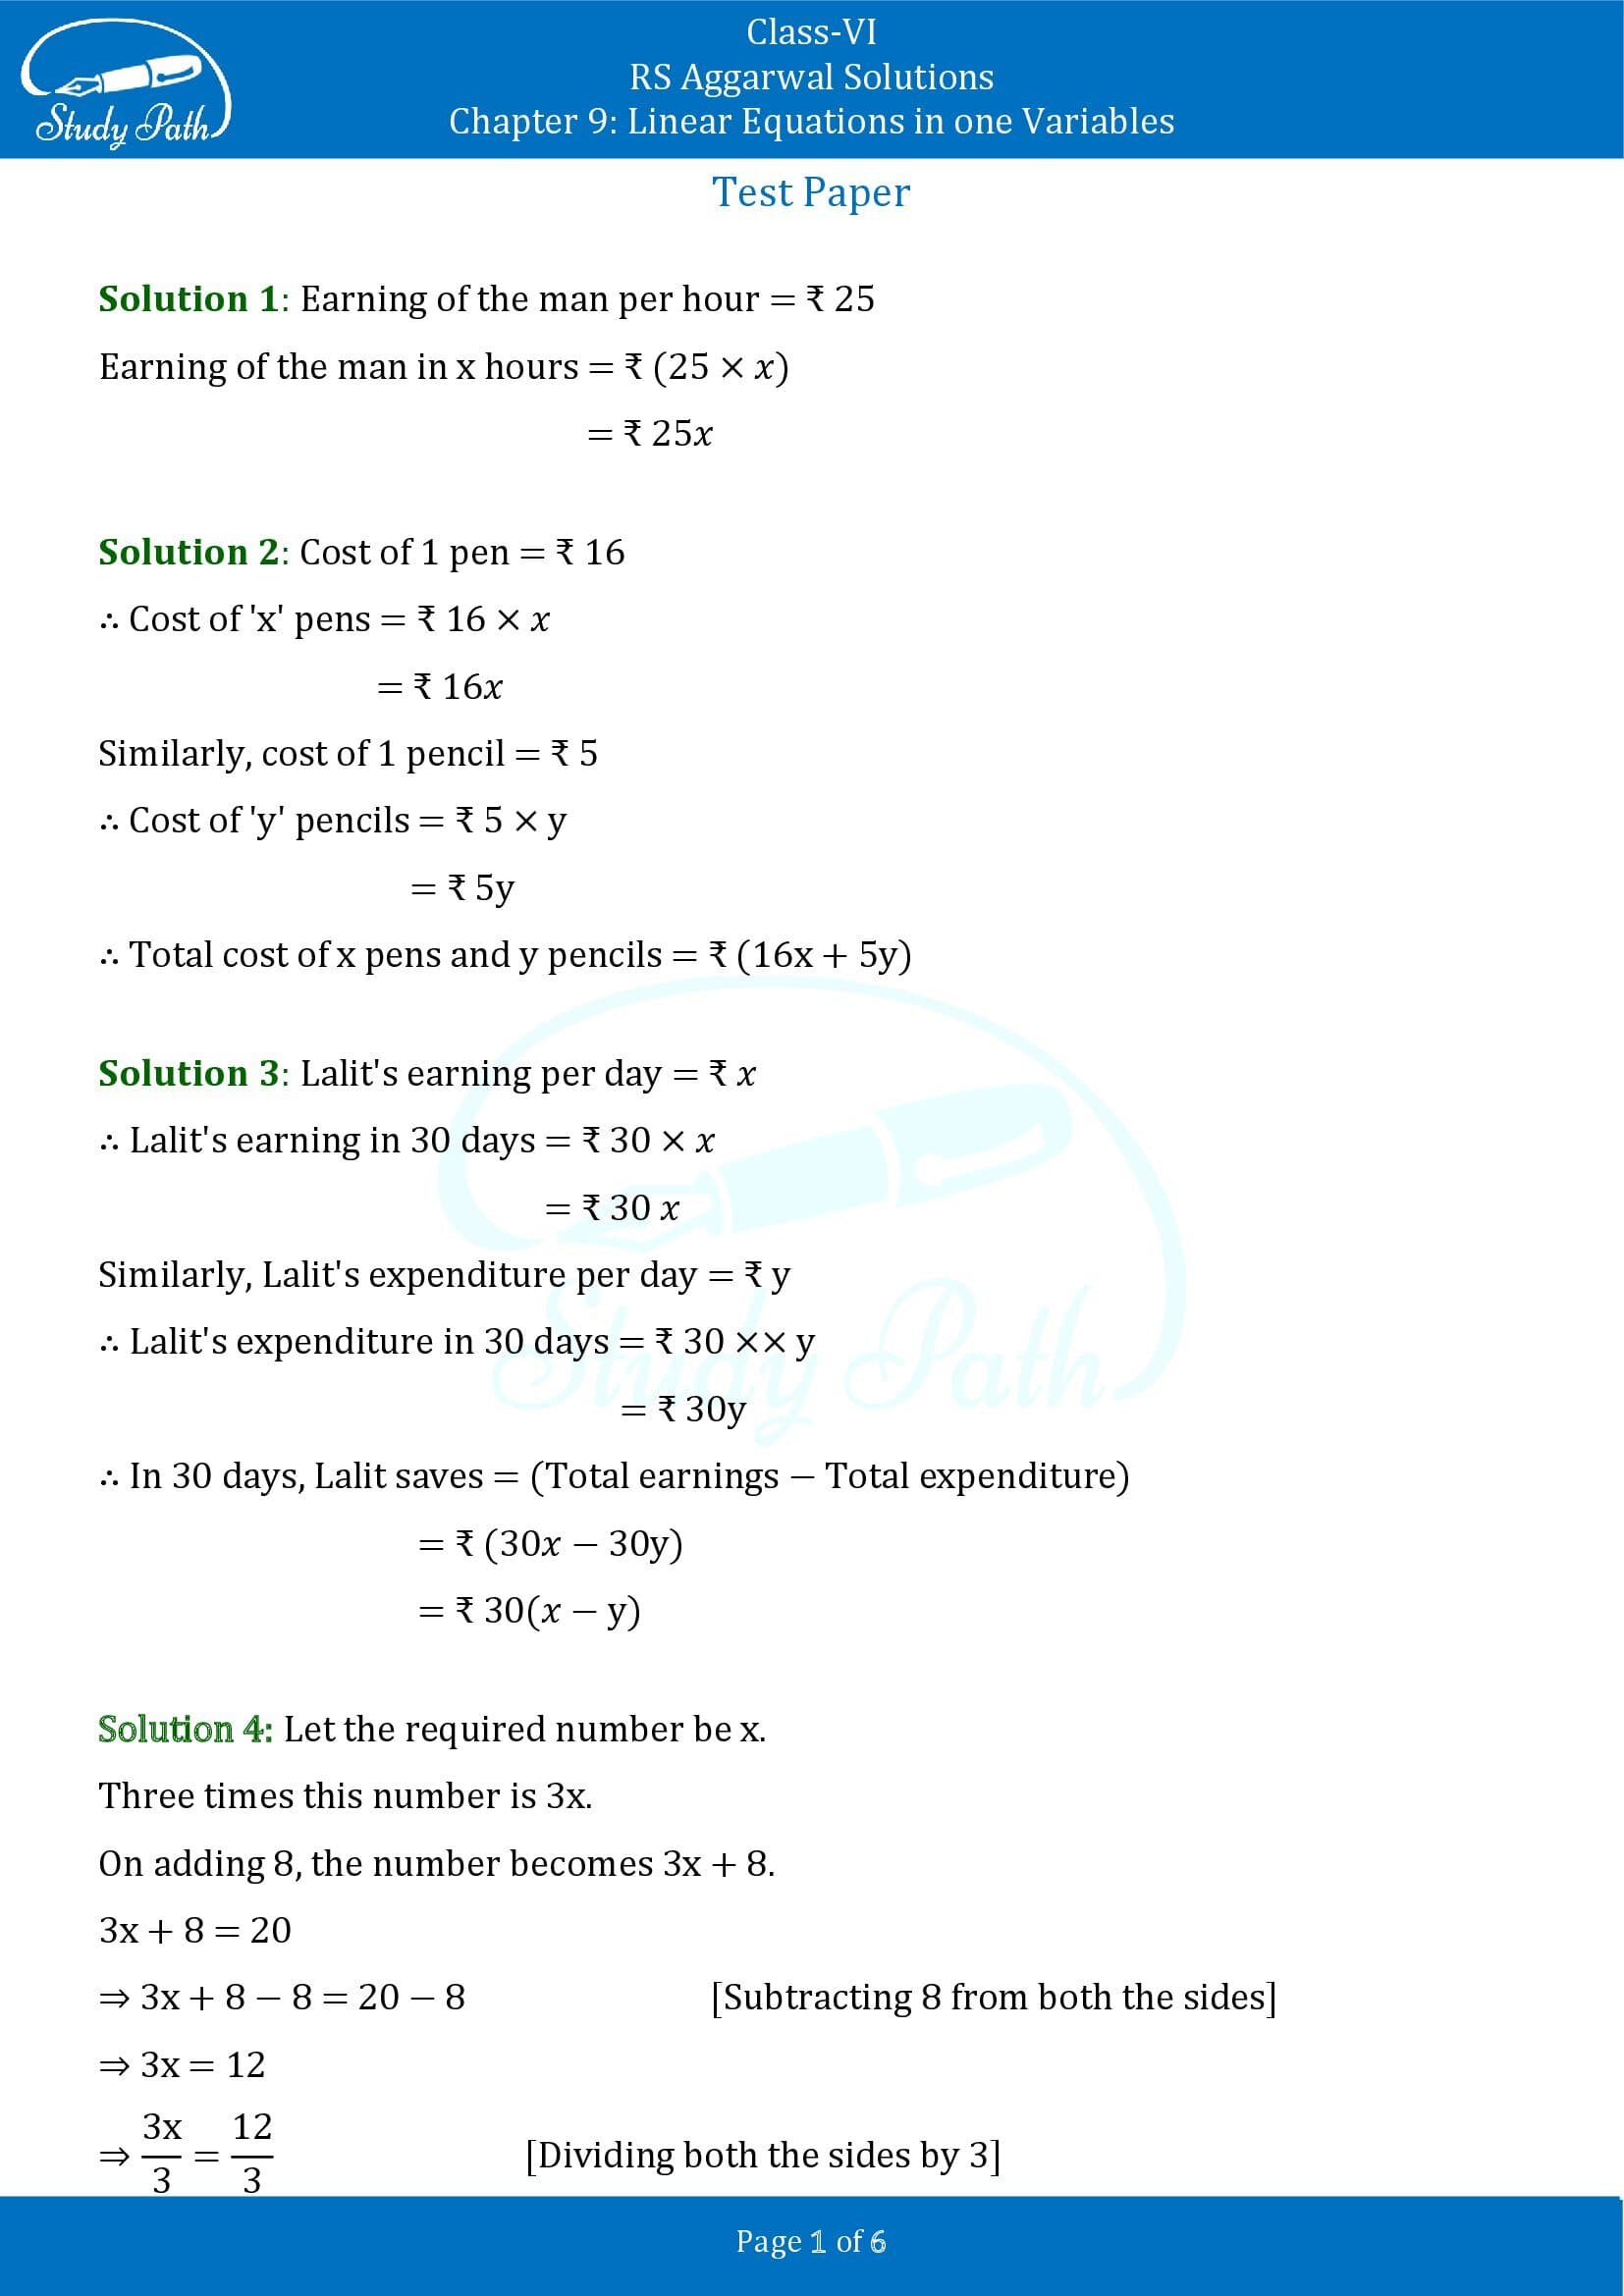 RS Aggarwal Solutions Class 6 Chapter 9 Linear Equations in One Variable Test Paper 00001